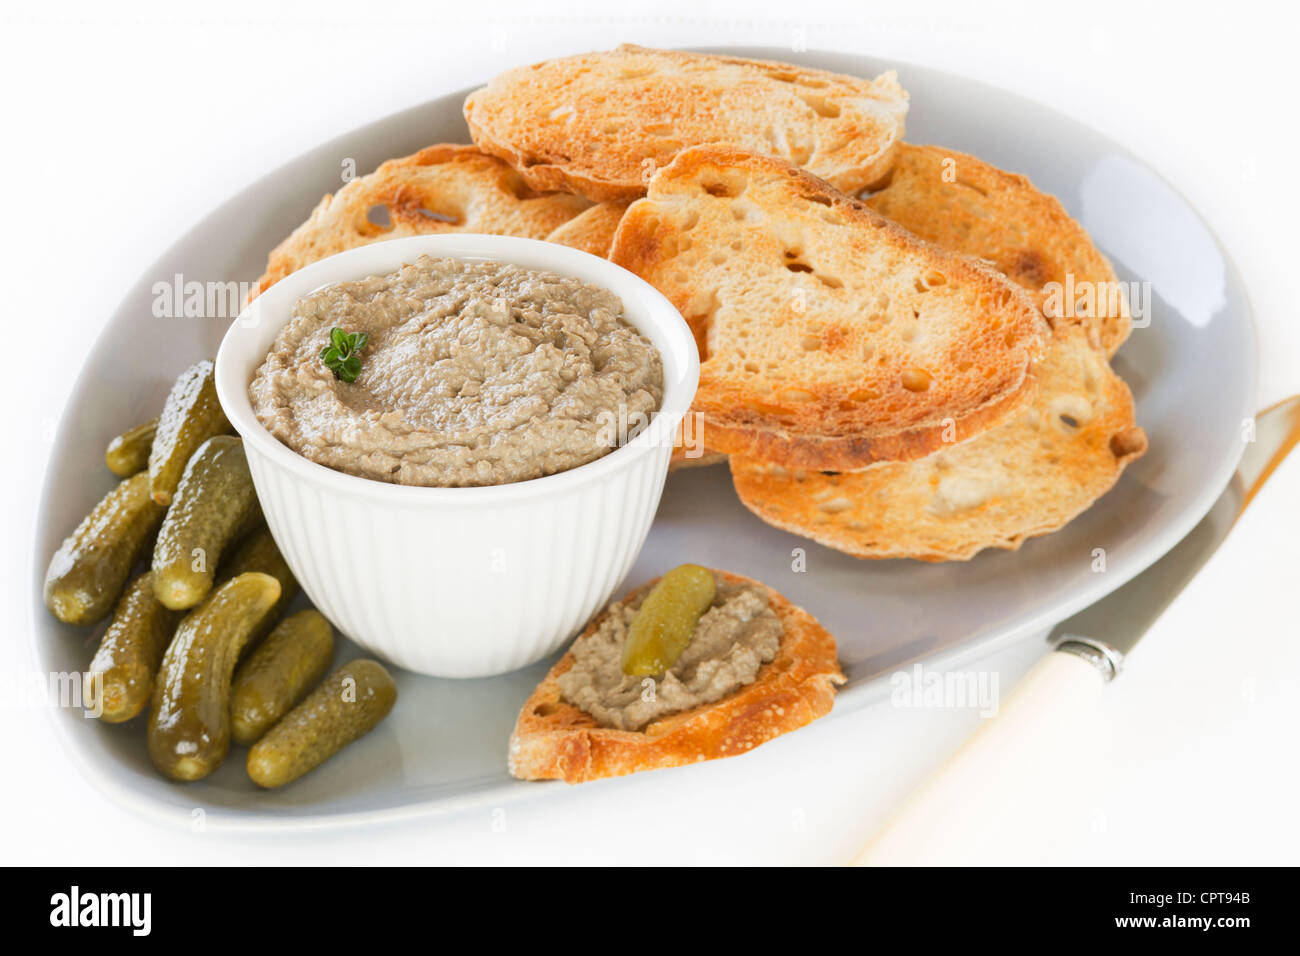 Home made chicken liver pate with with toasted sourdough and gherkins, arranged on a platter. Stock Photo